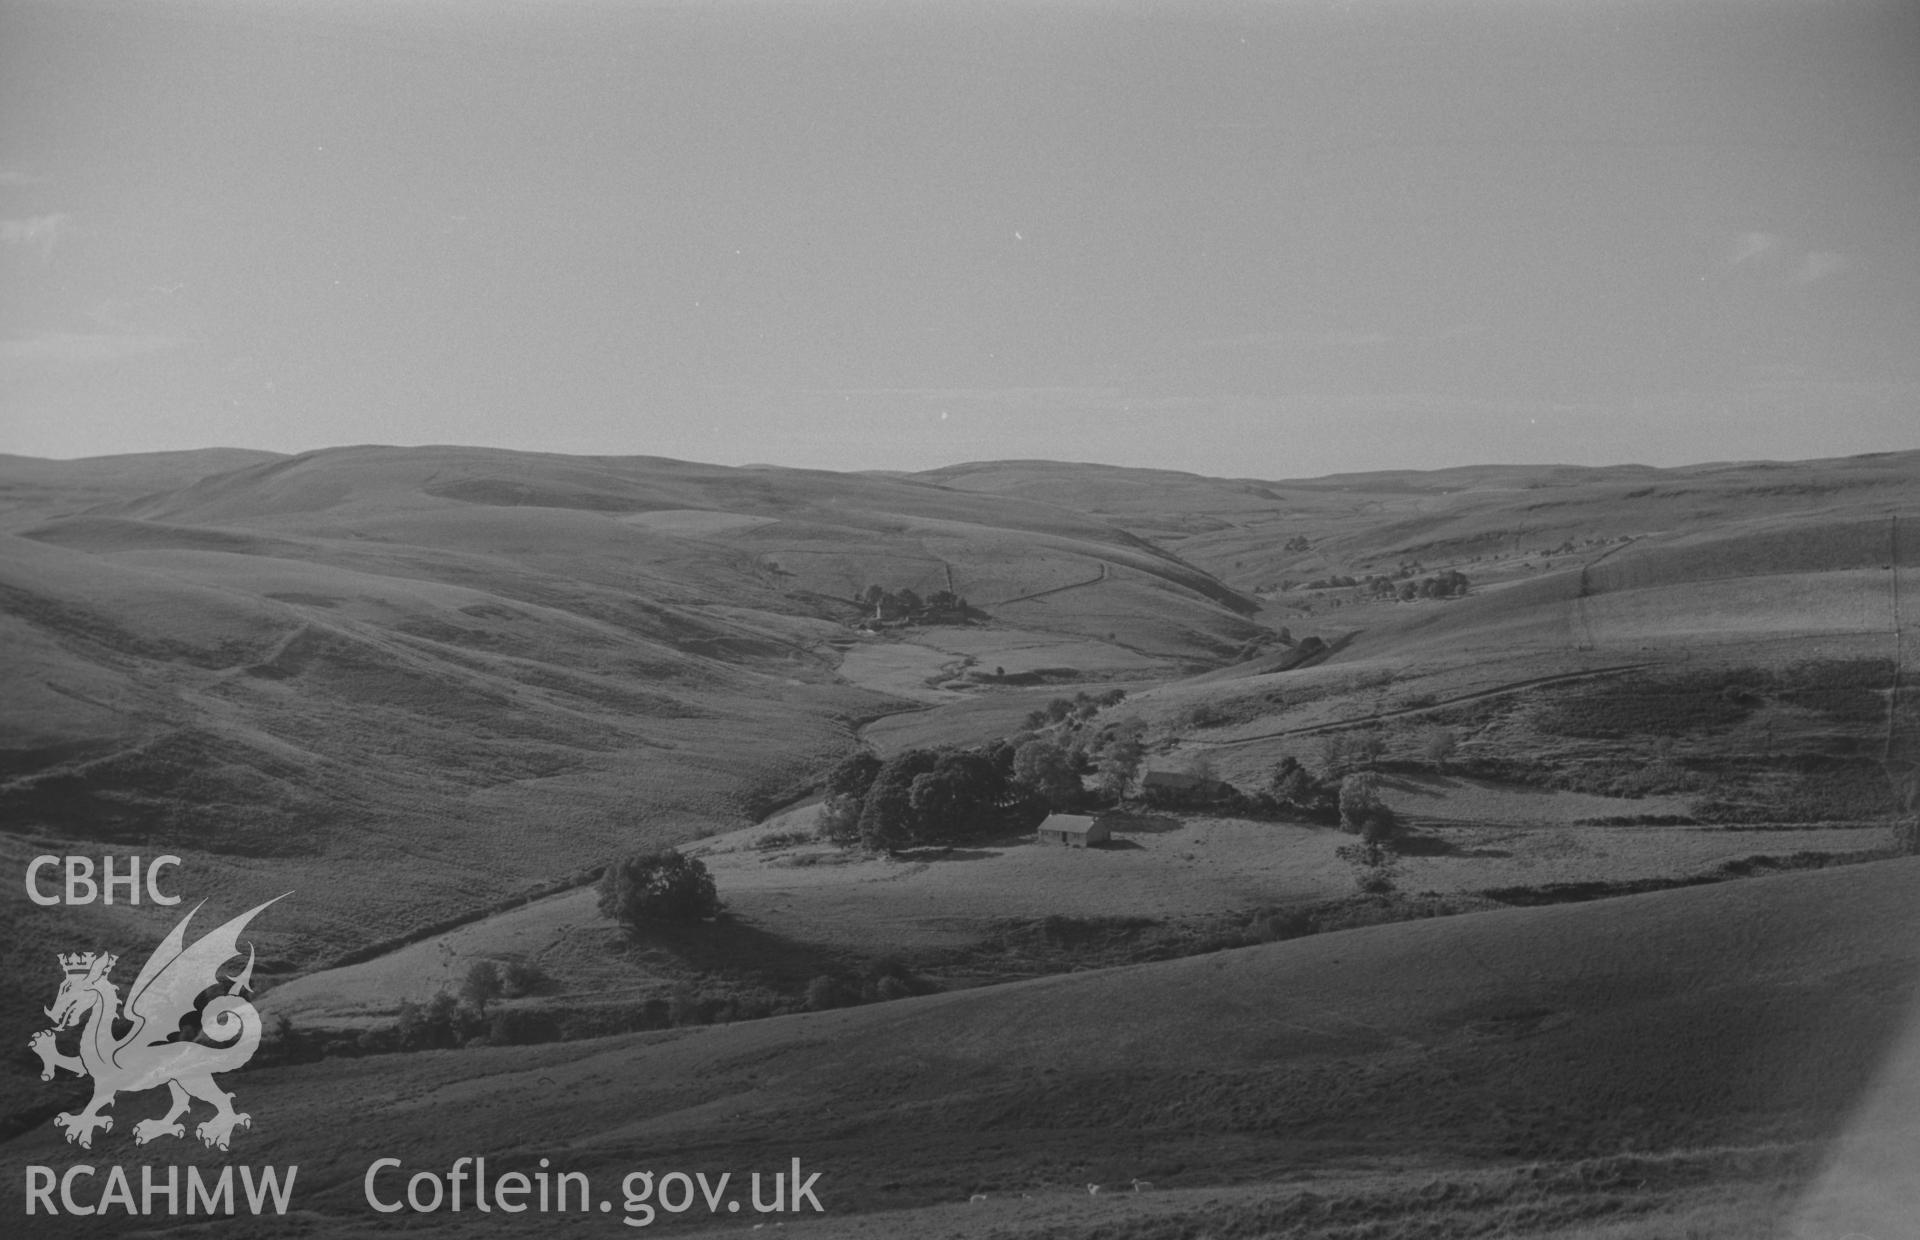 Digital copy of black & white negative looking up Pysgotwr Fawr valley; Bryn-Ambor farm and lead mine in middle distance; Bryn-Glas and Nant Gwerrog in the distance. Photograph by Arthur O. Chater, September 1966, looking north west from SN 750 505.